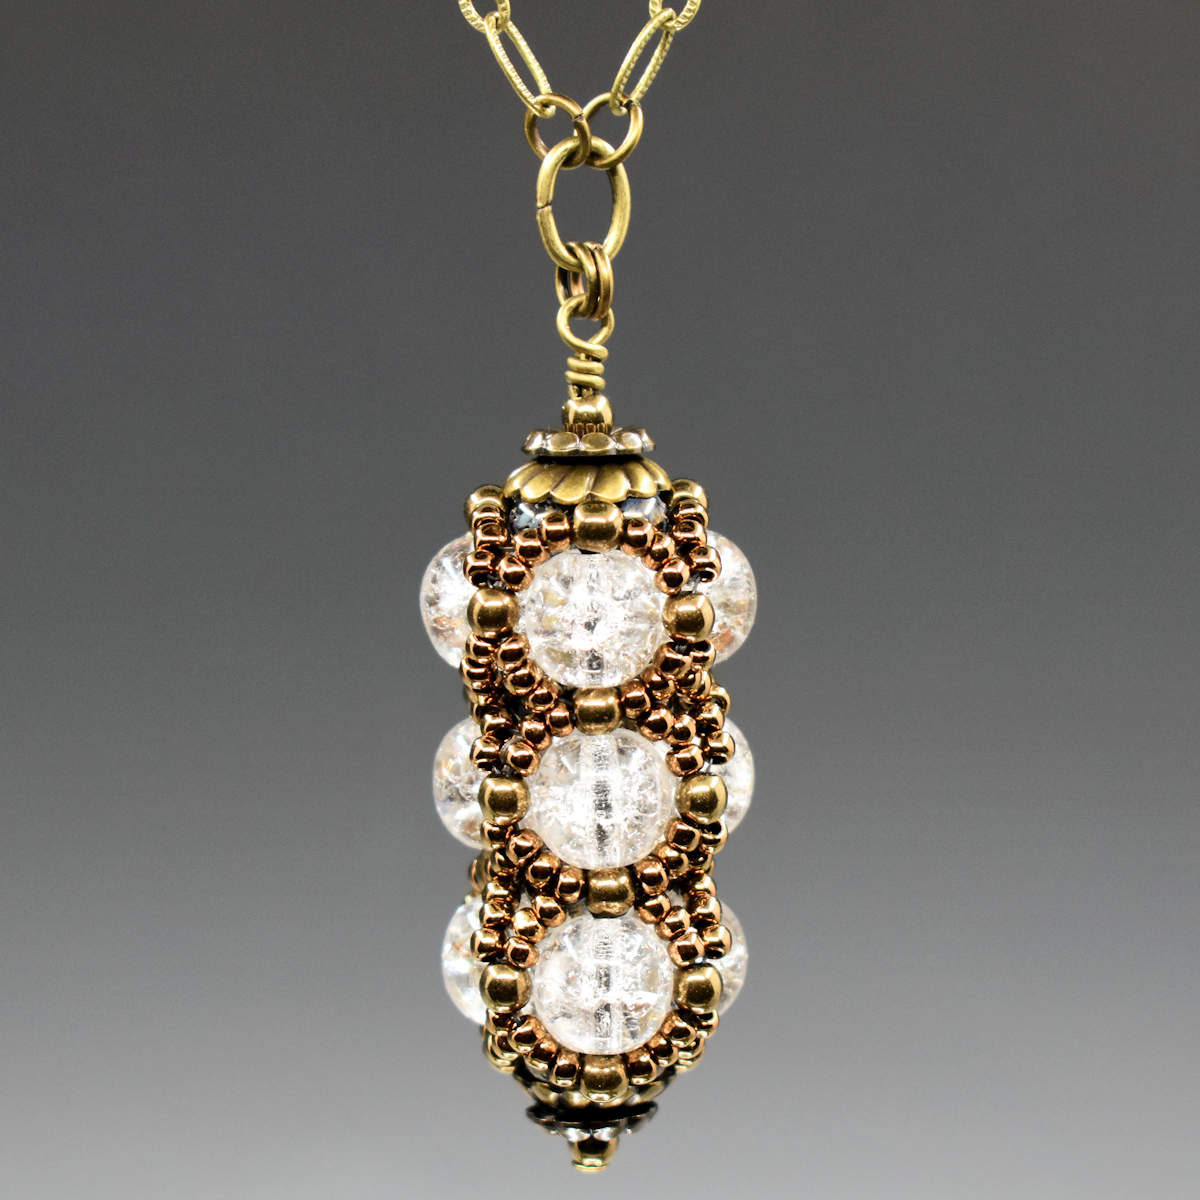 A columnar pendant formed from clear crackle glass and a netting of gold seed beads is suspended from a gold chain. The pendant has a stack of gold tone findings that cap it at the top and bottom.